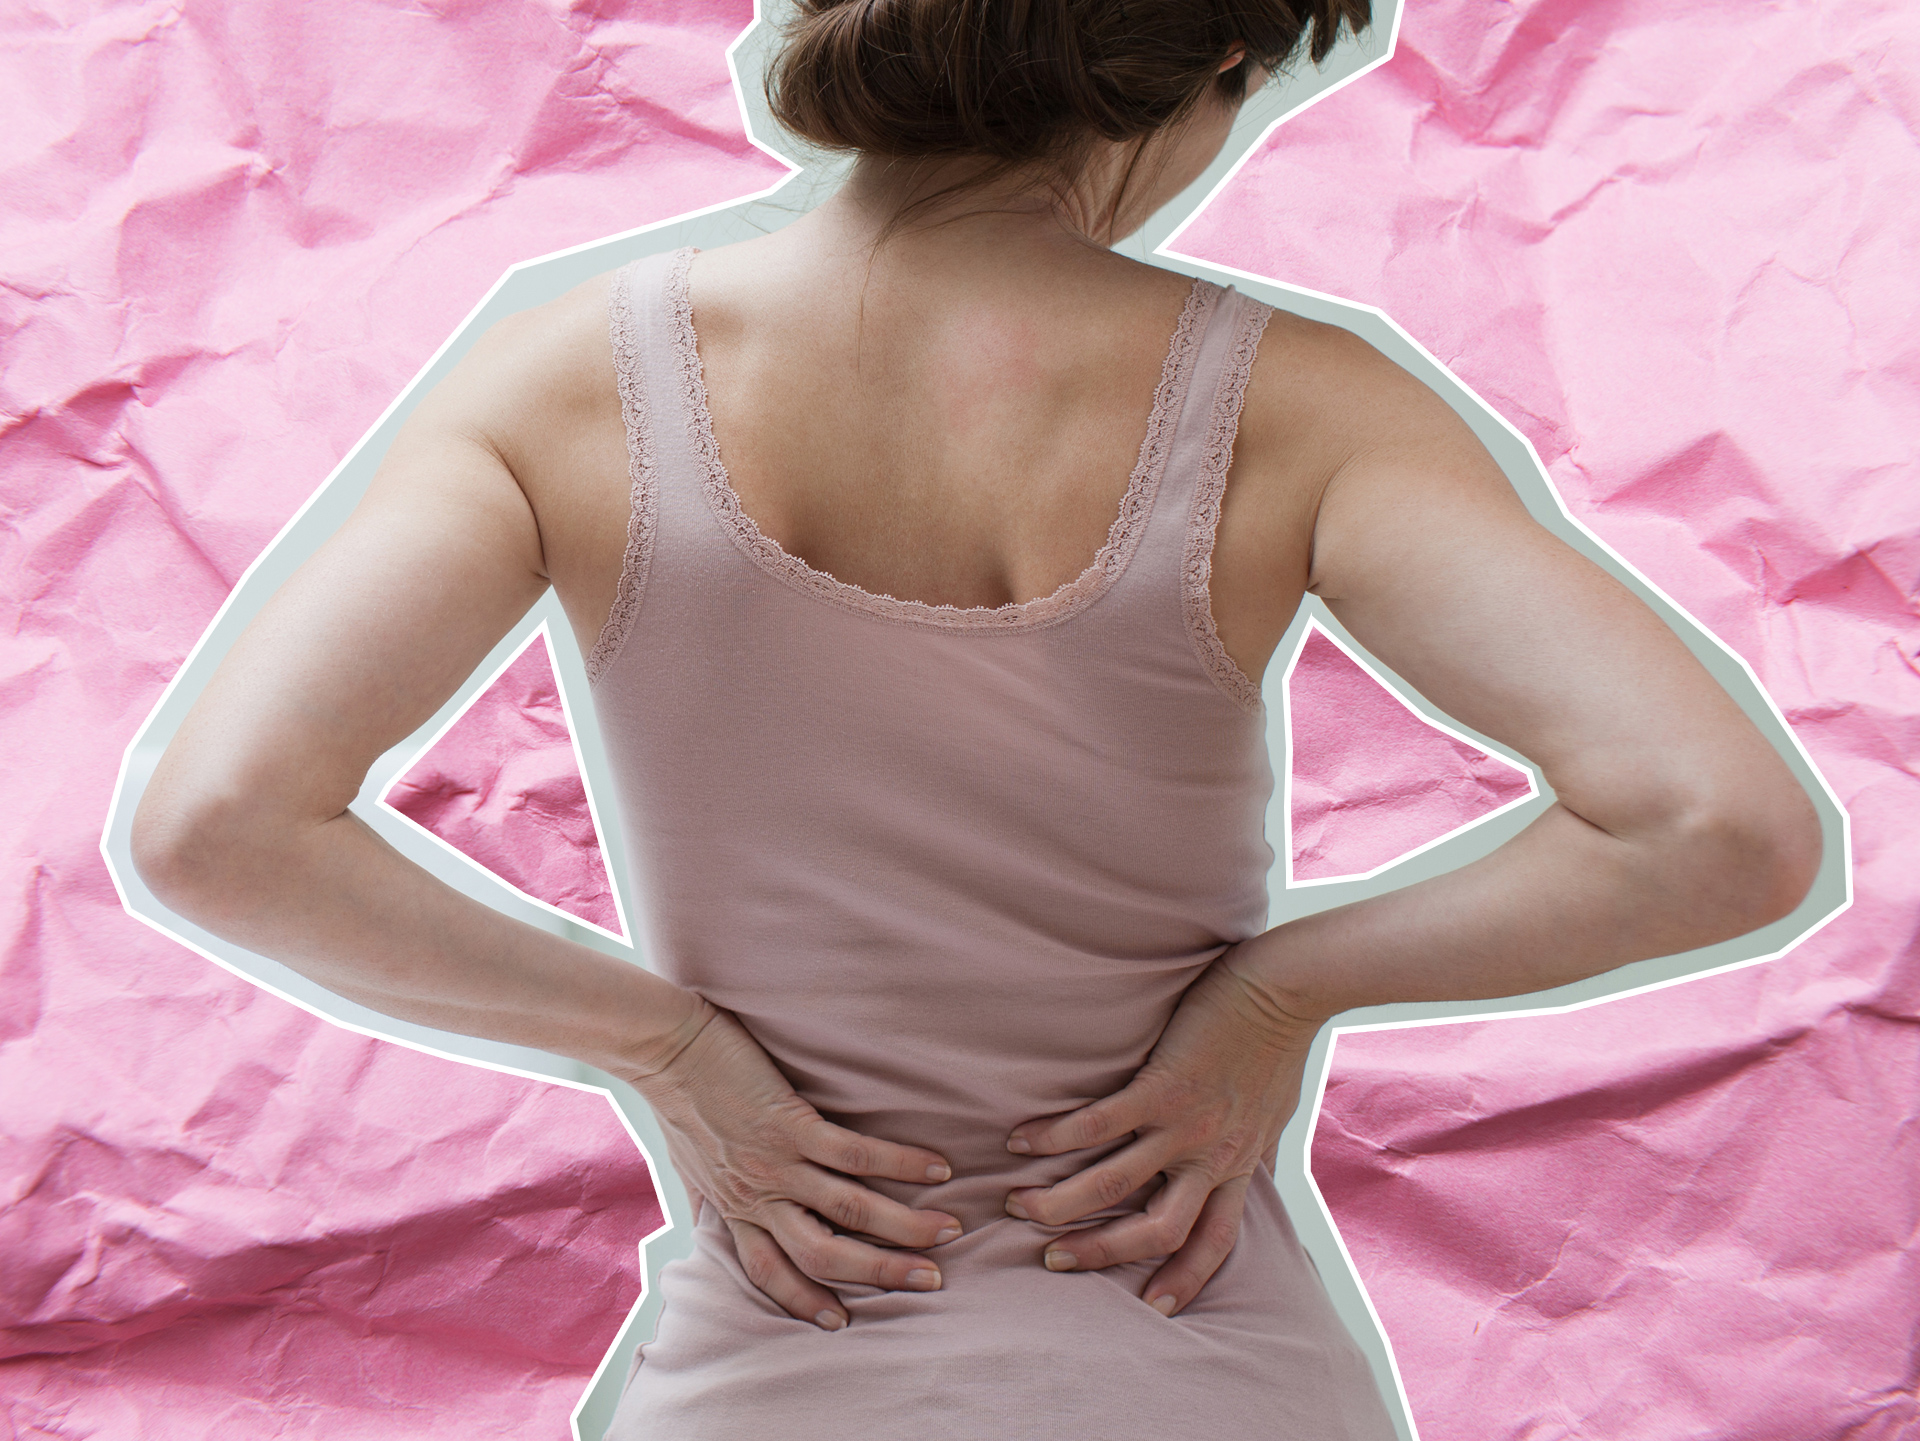 How to ease back pain fast